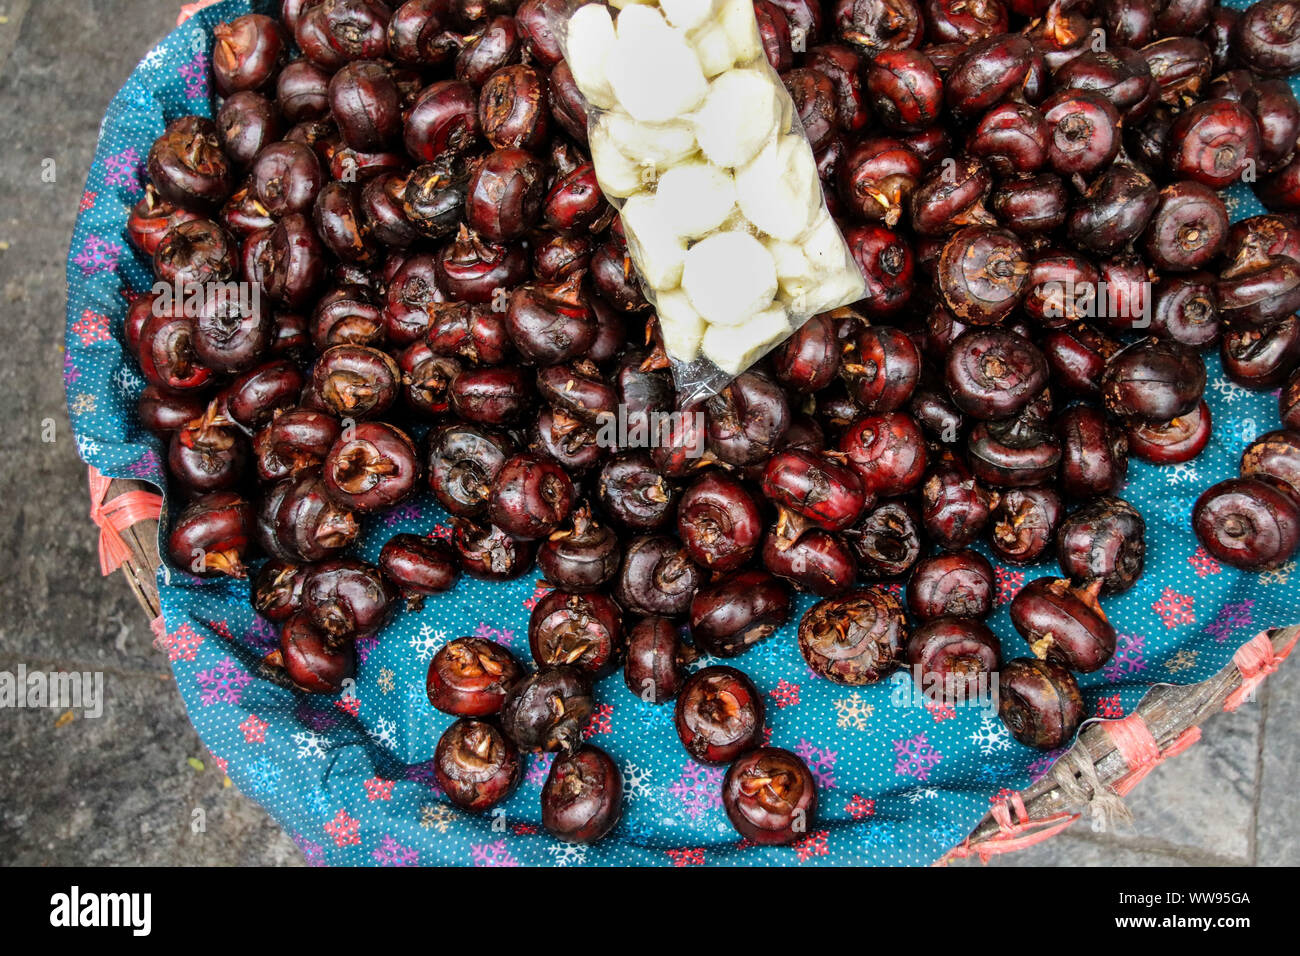 Eleocharis dulcis or water chestnuts sold as popular snack and street food in Hanoi Vietnam, showing authentic candid Vietnamese food and culture Stock Photo